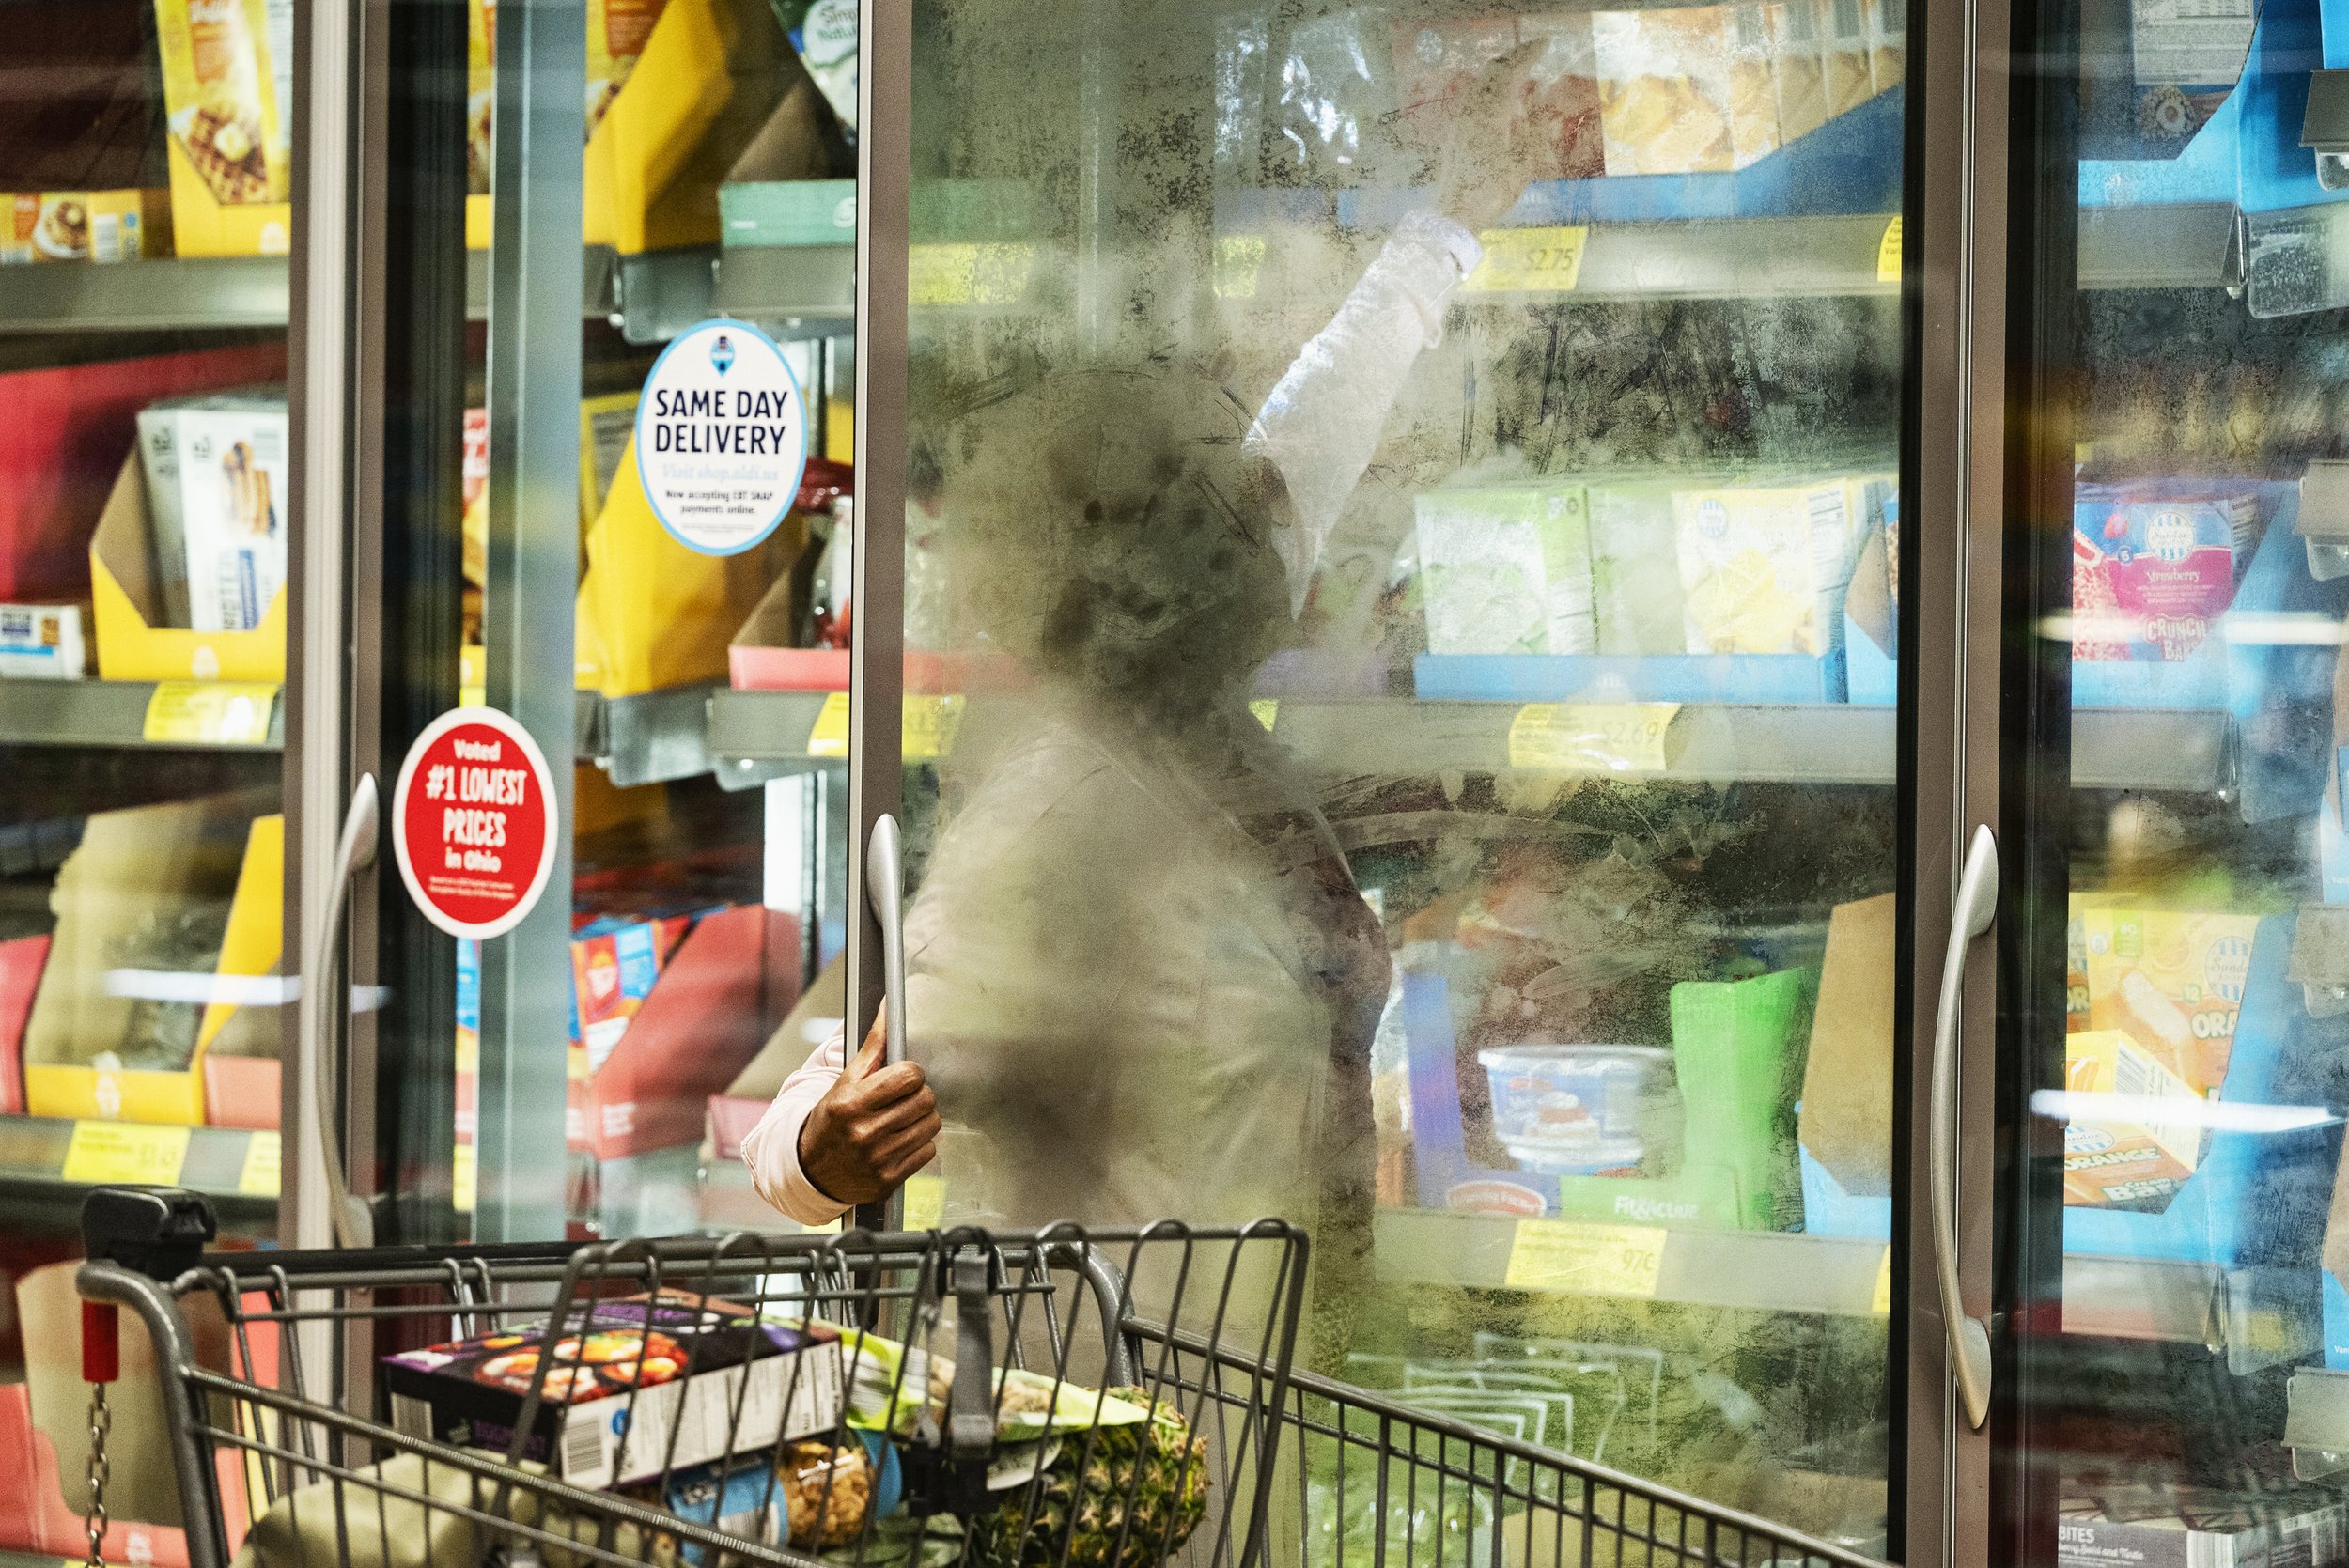  Dr. Tee Ford-Ahmed reaches into a freezer while browsing frozen food items at Aldi supermarket in Athens, Ohio, Saturday April 15, 2023.  